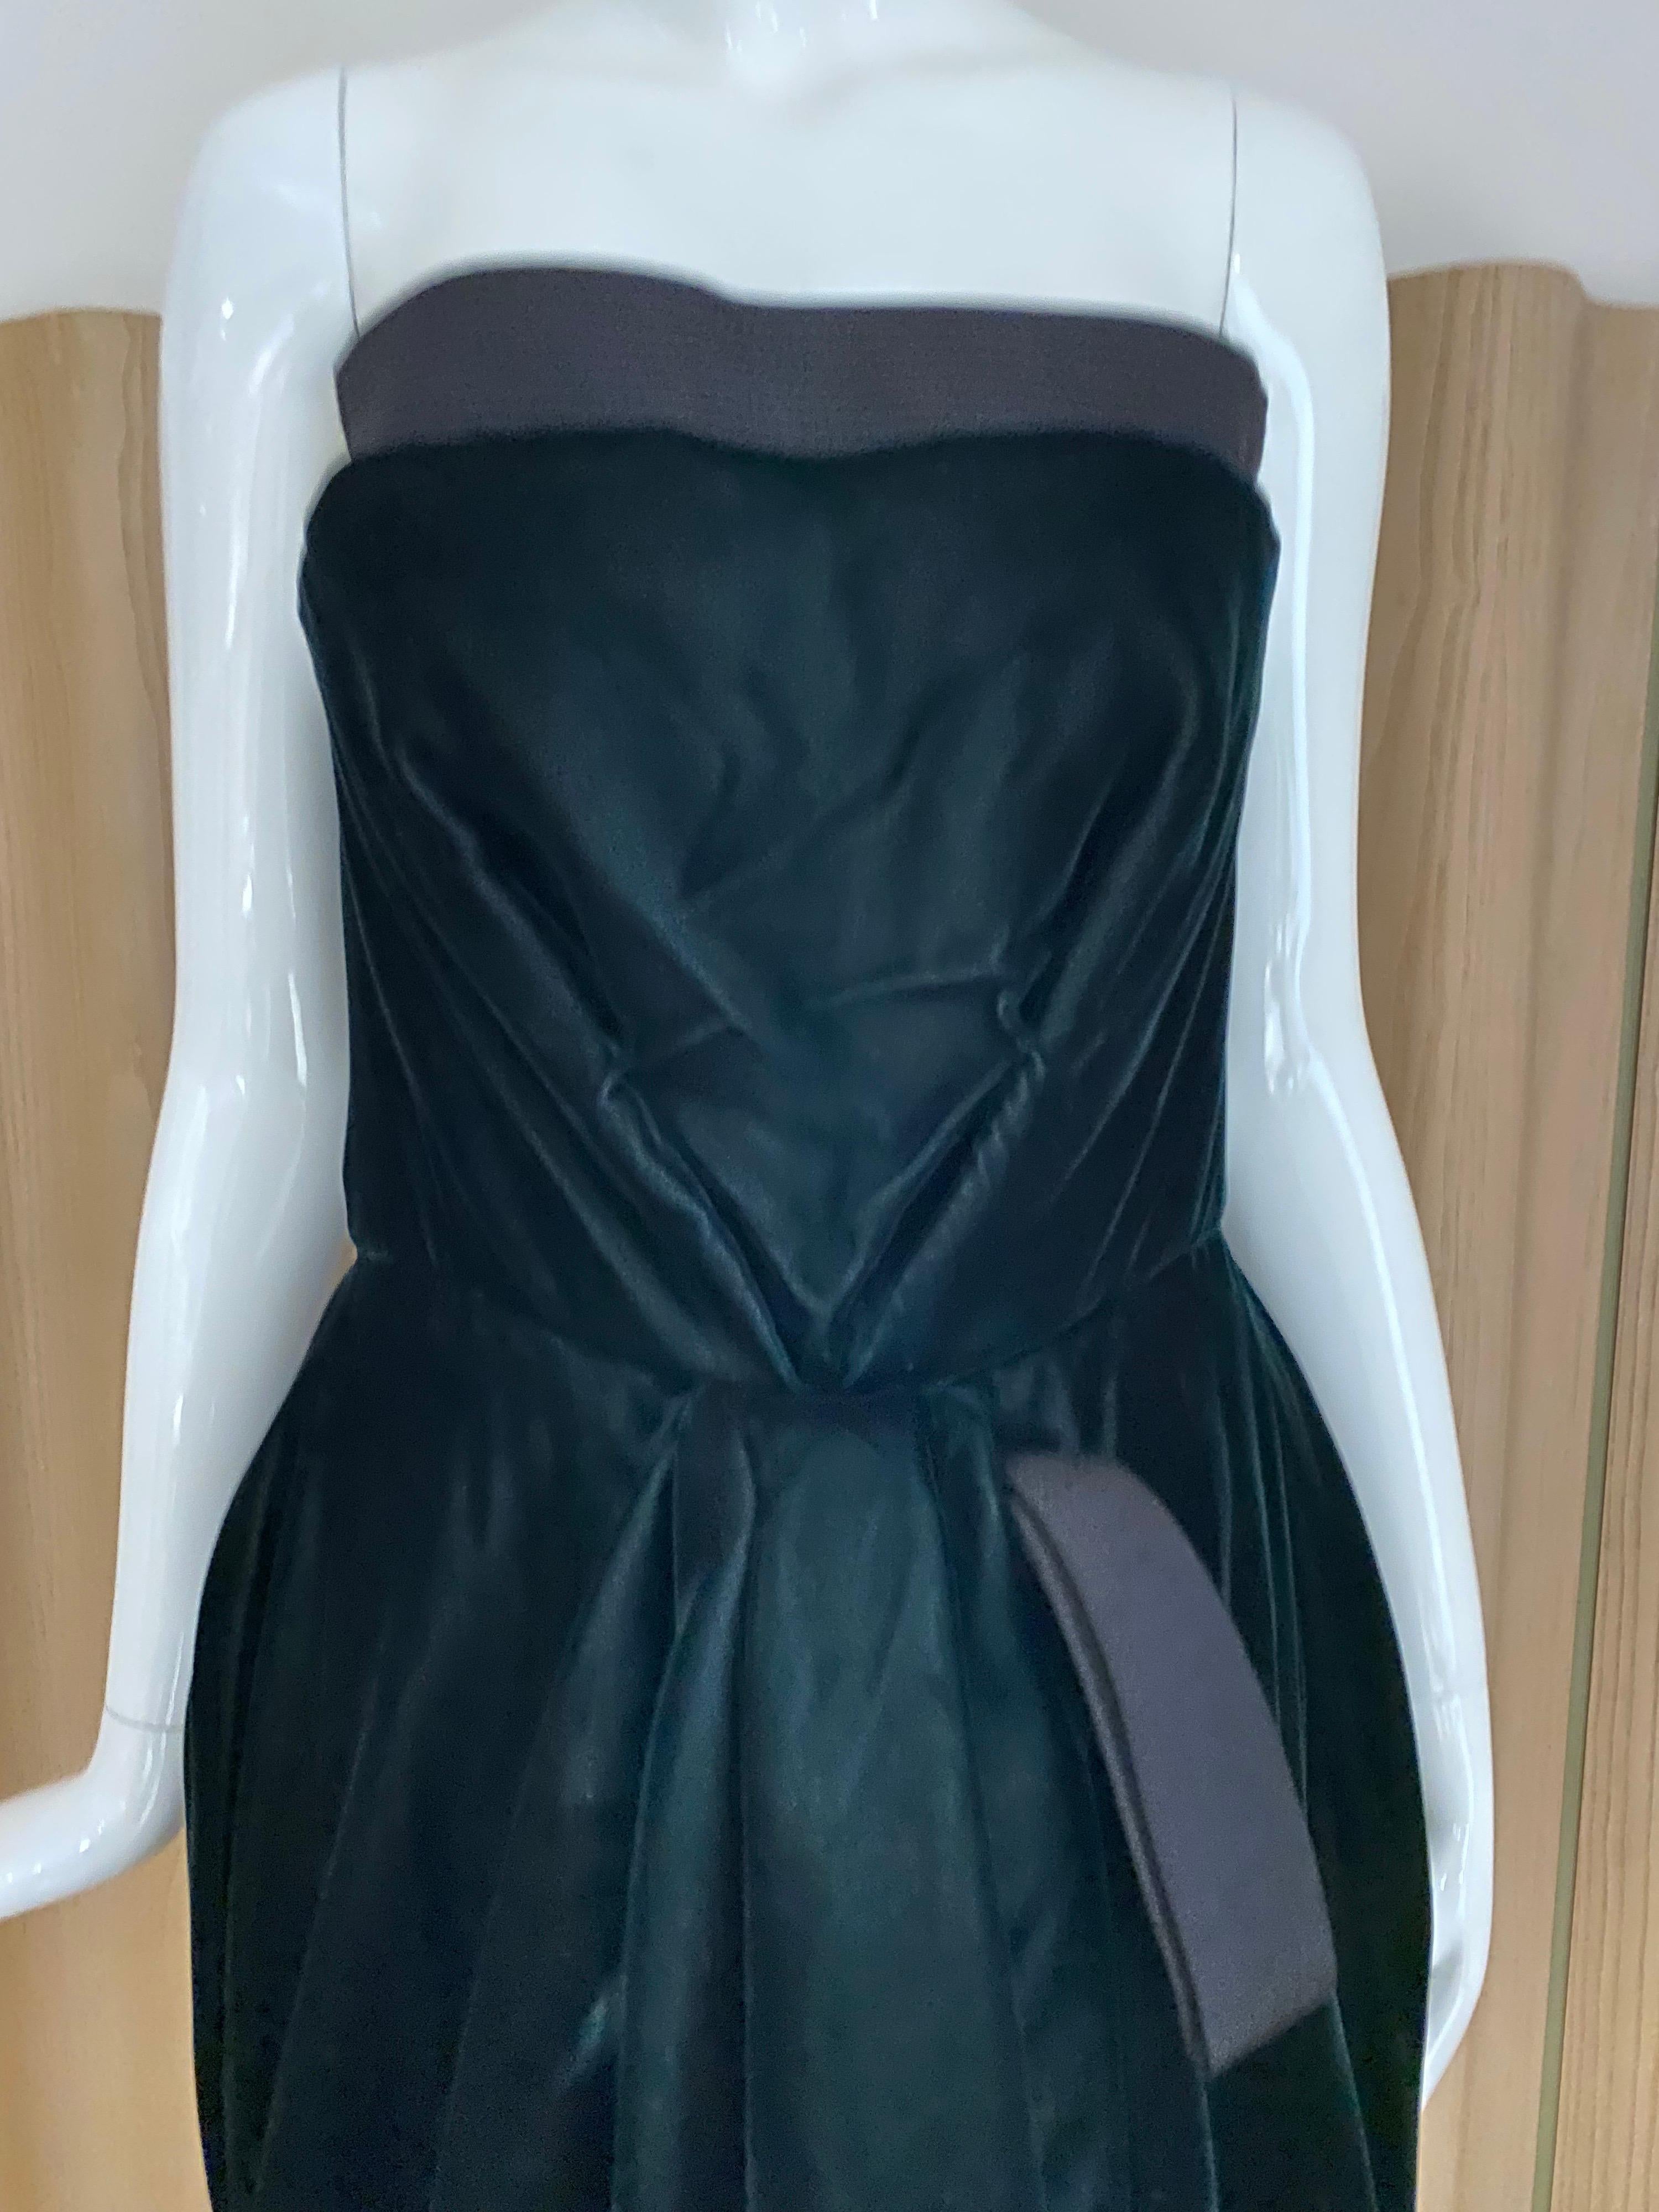 90s Gianfranco Ferre Green Velvet cocktail dress with black silk origami bow.
Built in bustier bra. Size Small
Measurement: Bust : 30” / Waist: 28” / Hip : 42”
Dress length : 34” 

Dress in excellent condition. 